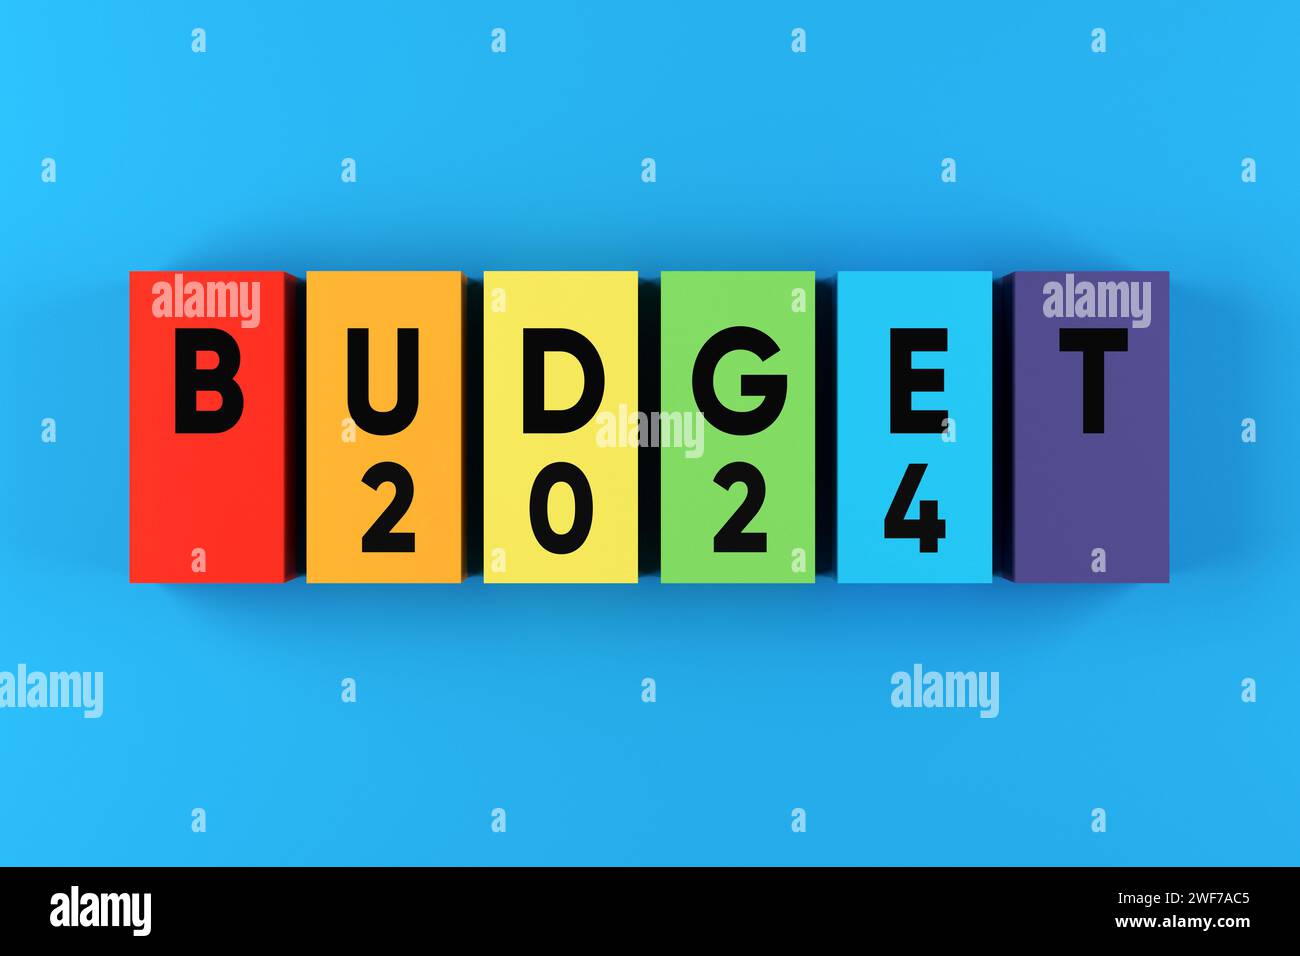 Budget planning for the year 2024. Financial budgeting and business planning concept. The word budget 2024 on colorful blocks. Stock Photo